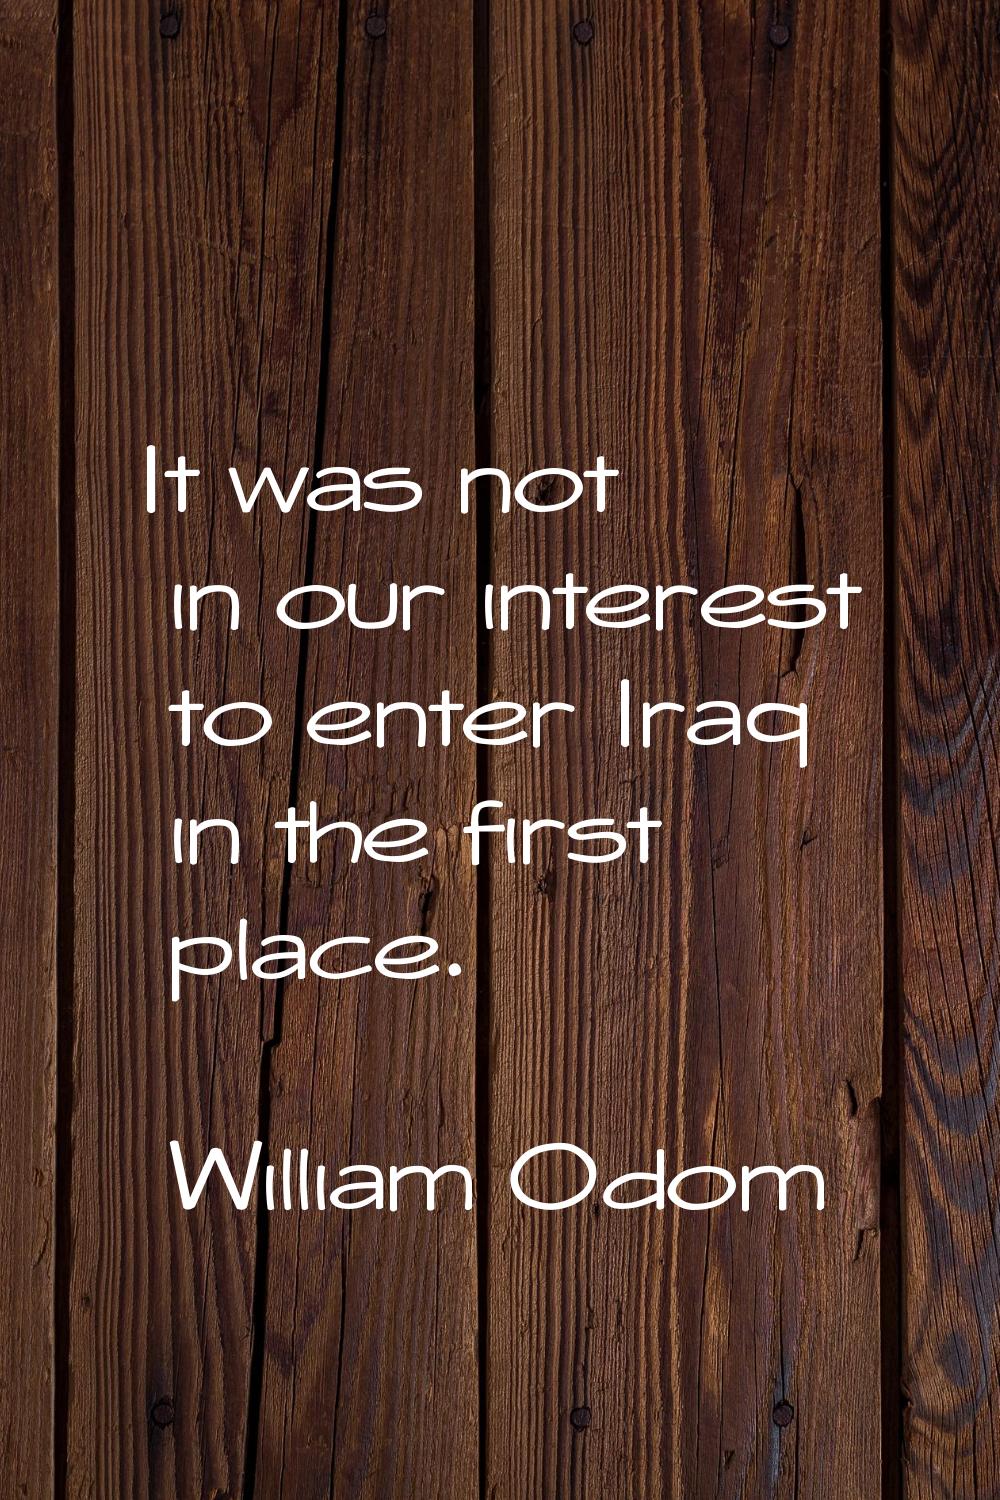 It was not in our interest to enter Iraq in the first place.